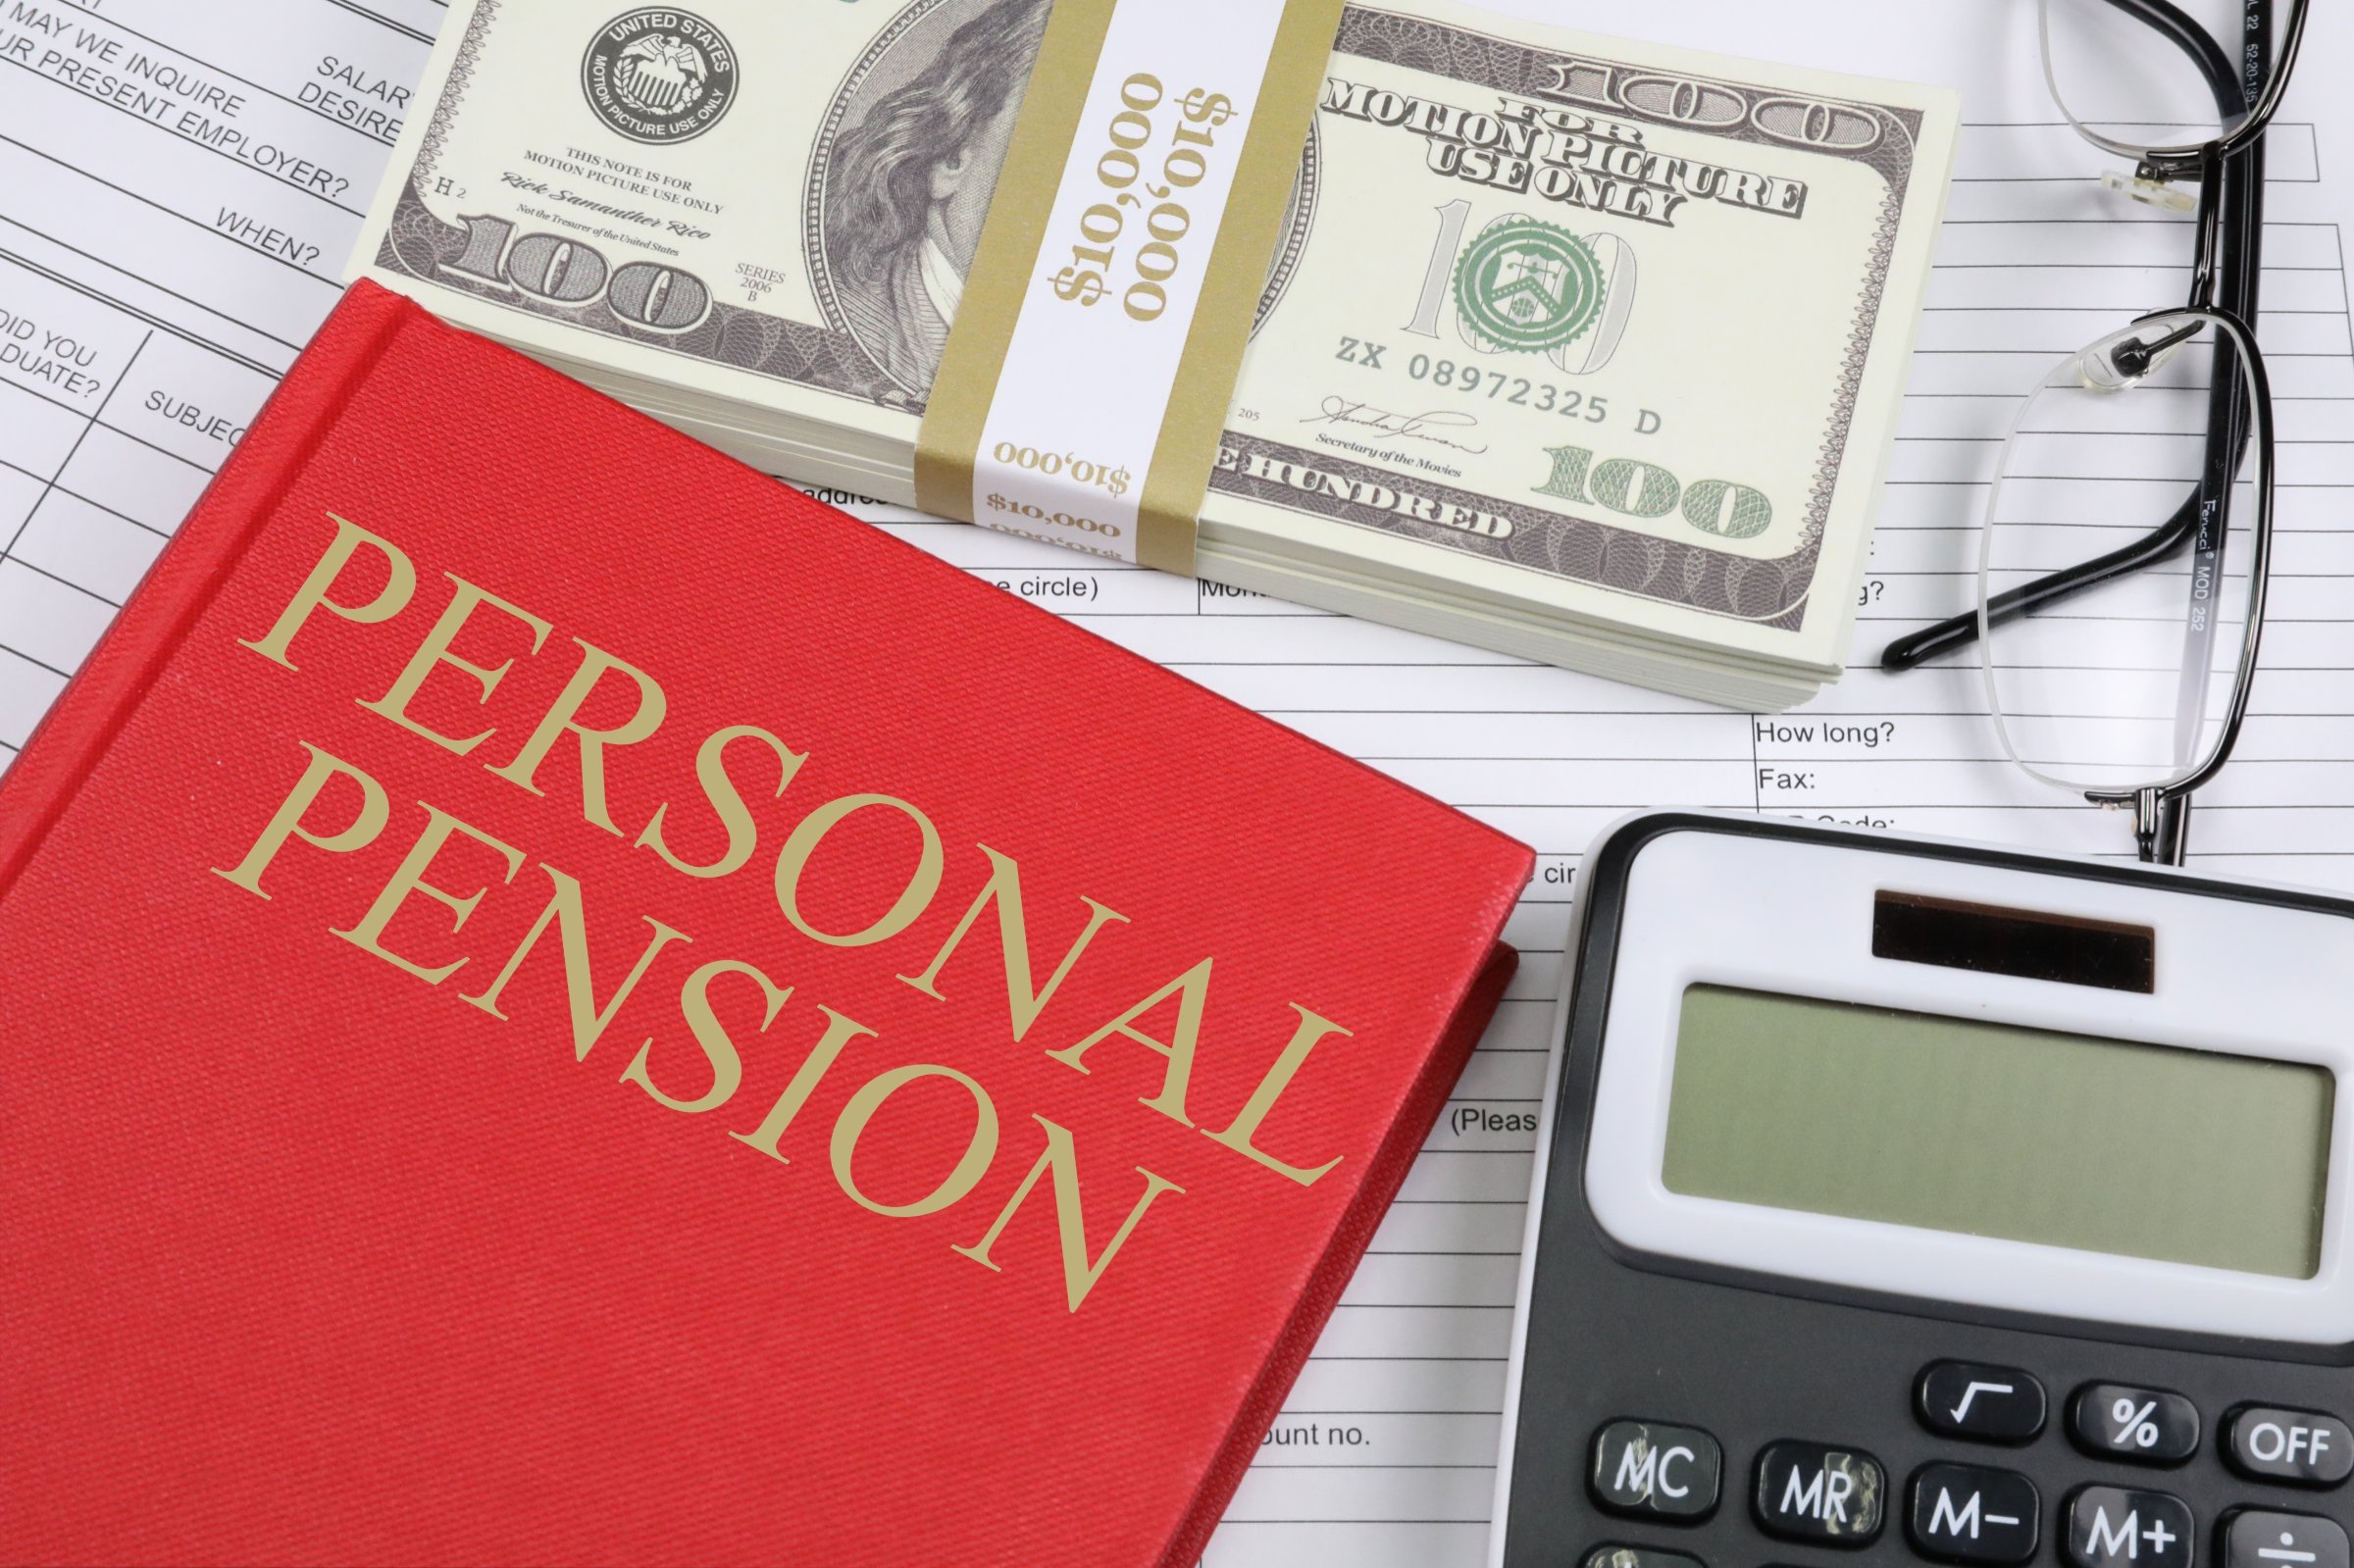 personal pension